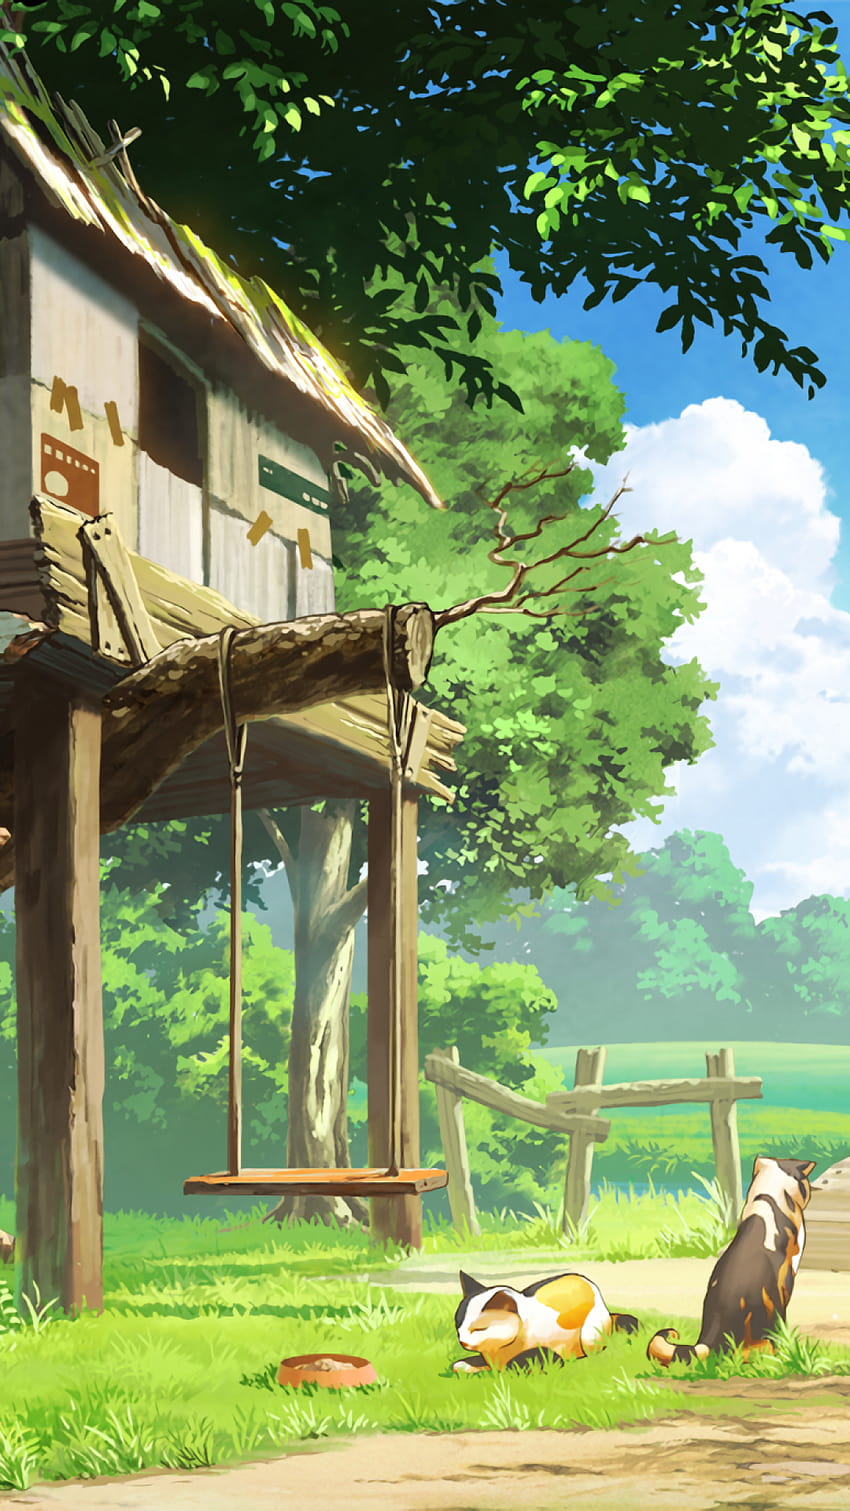 1080x1920 Anime Landscape, Tree House, Cats, Clouds, anime scenery iphone HD phone wallpaper